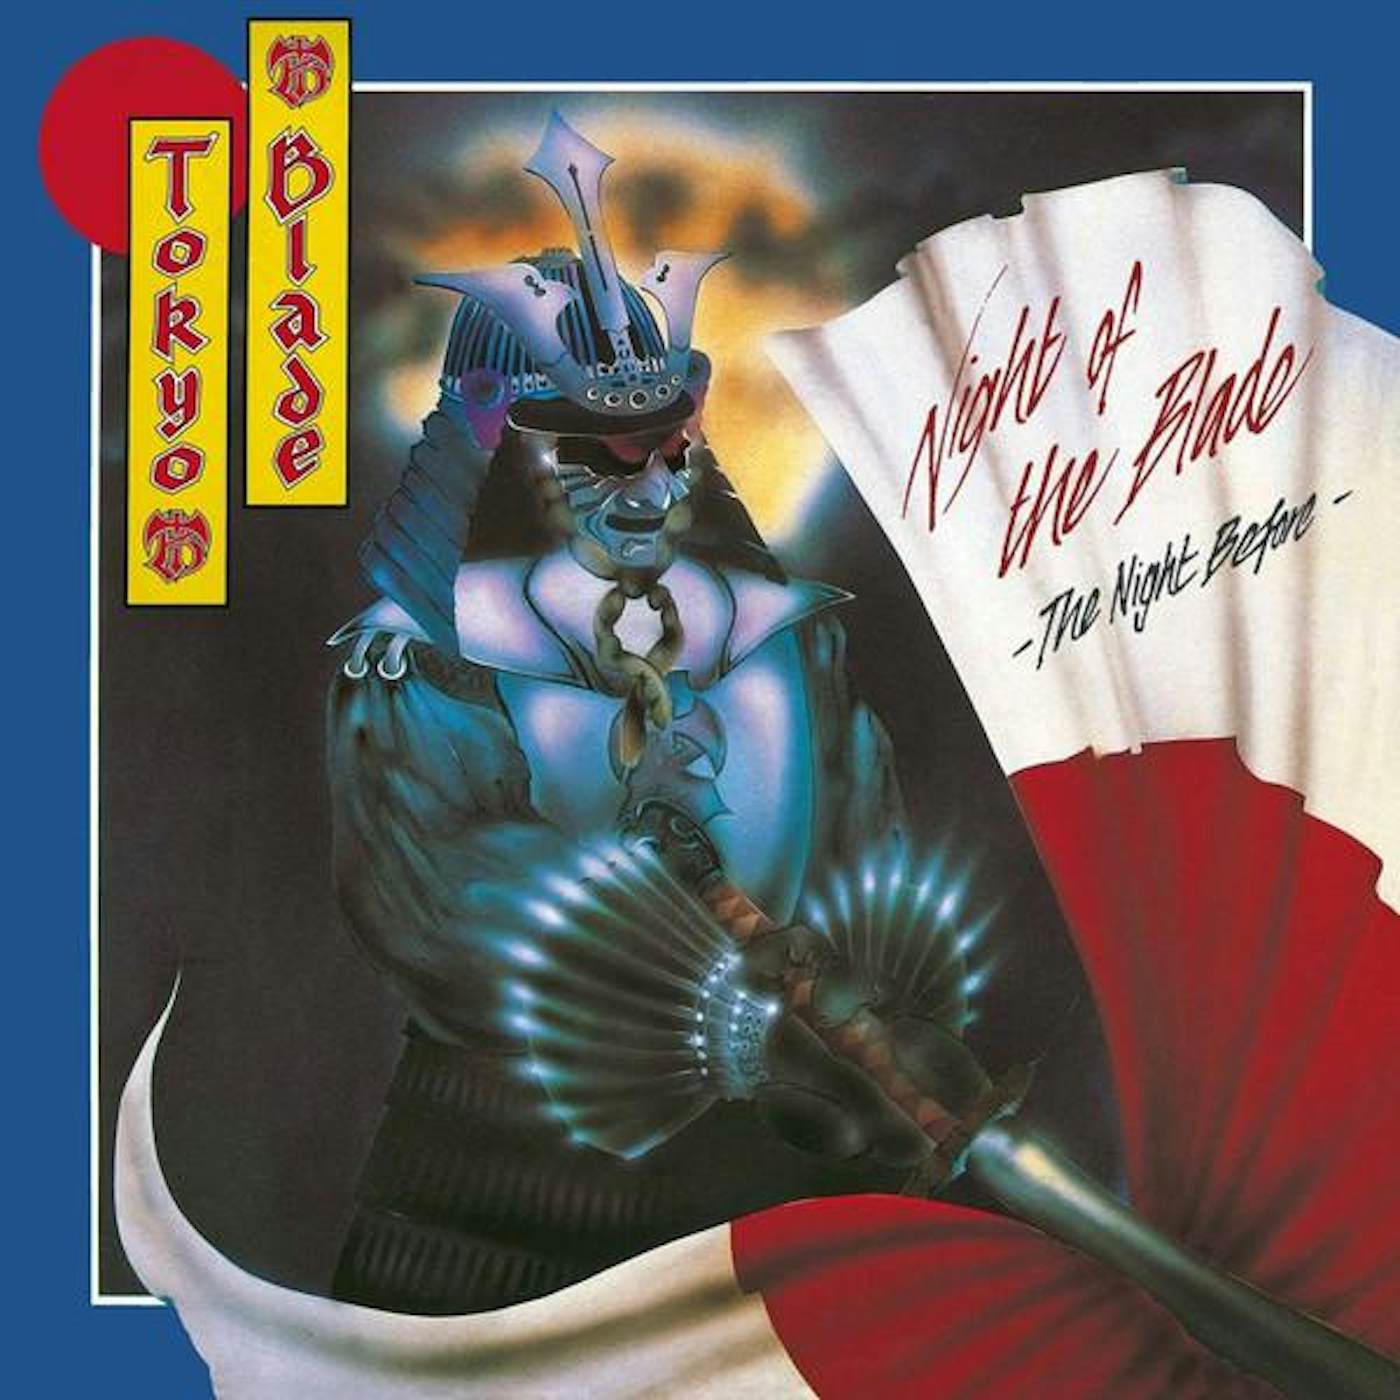 Tokyo Blade NIGHT OF THE BLADE - THE NIGHT BEFORE CD